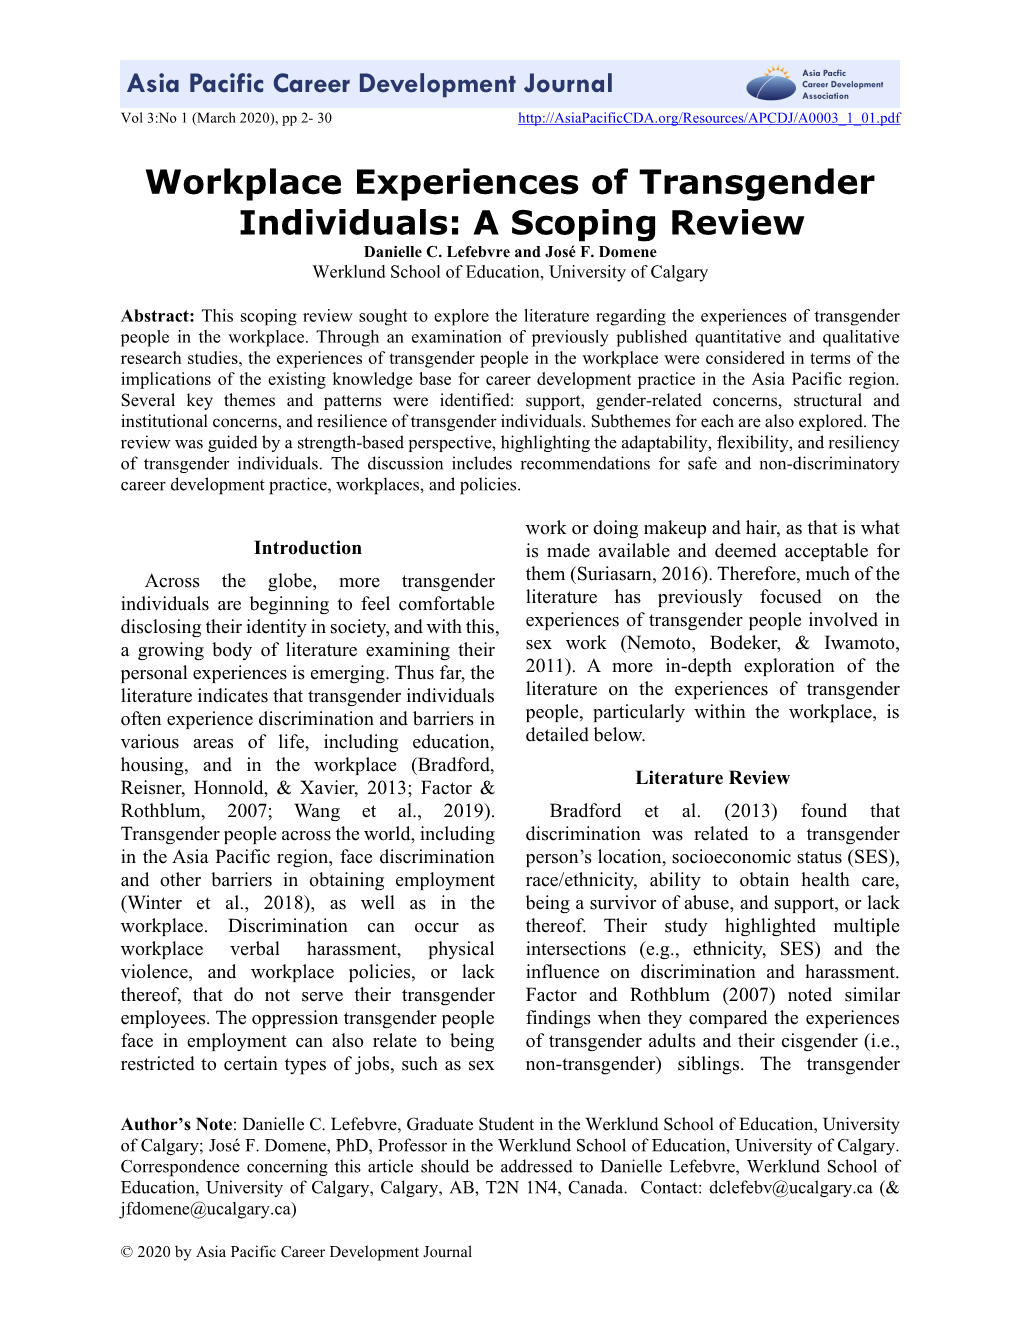 Workplace Experiences of Transgender Individuals: a Scoping Review Danielle C